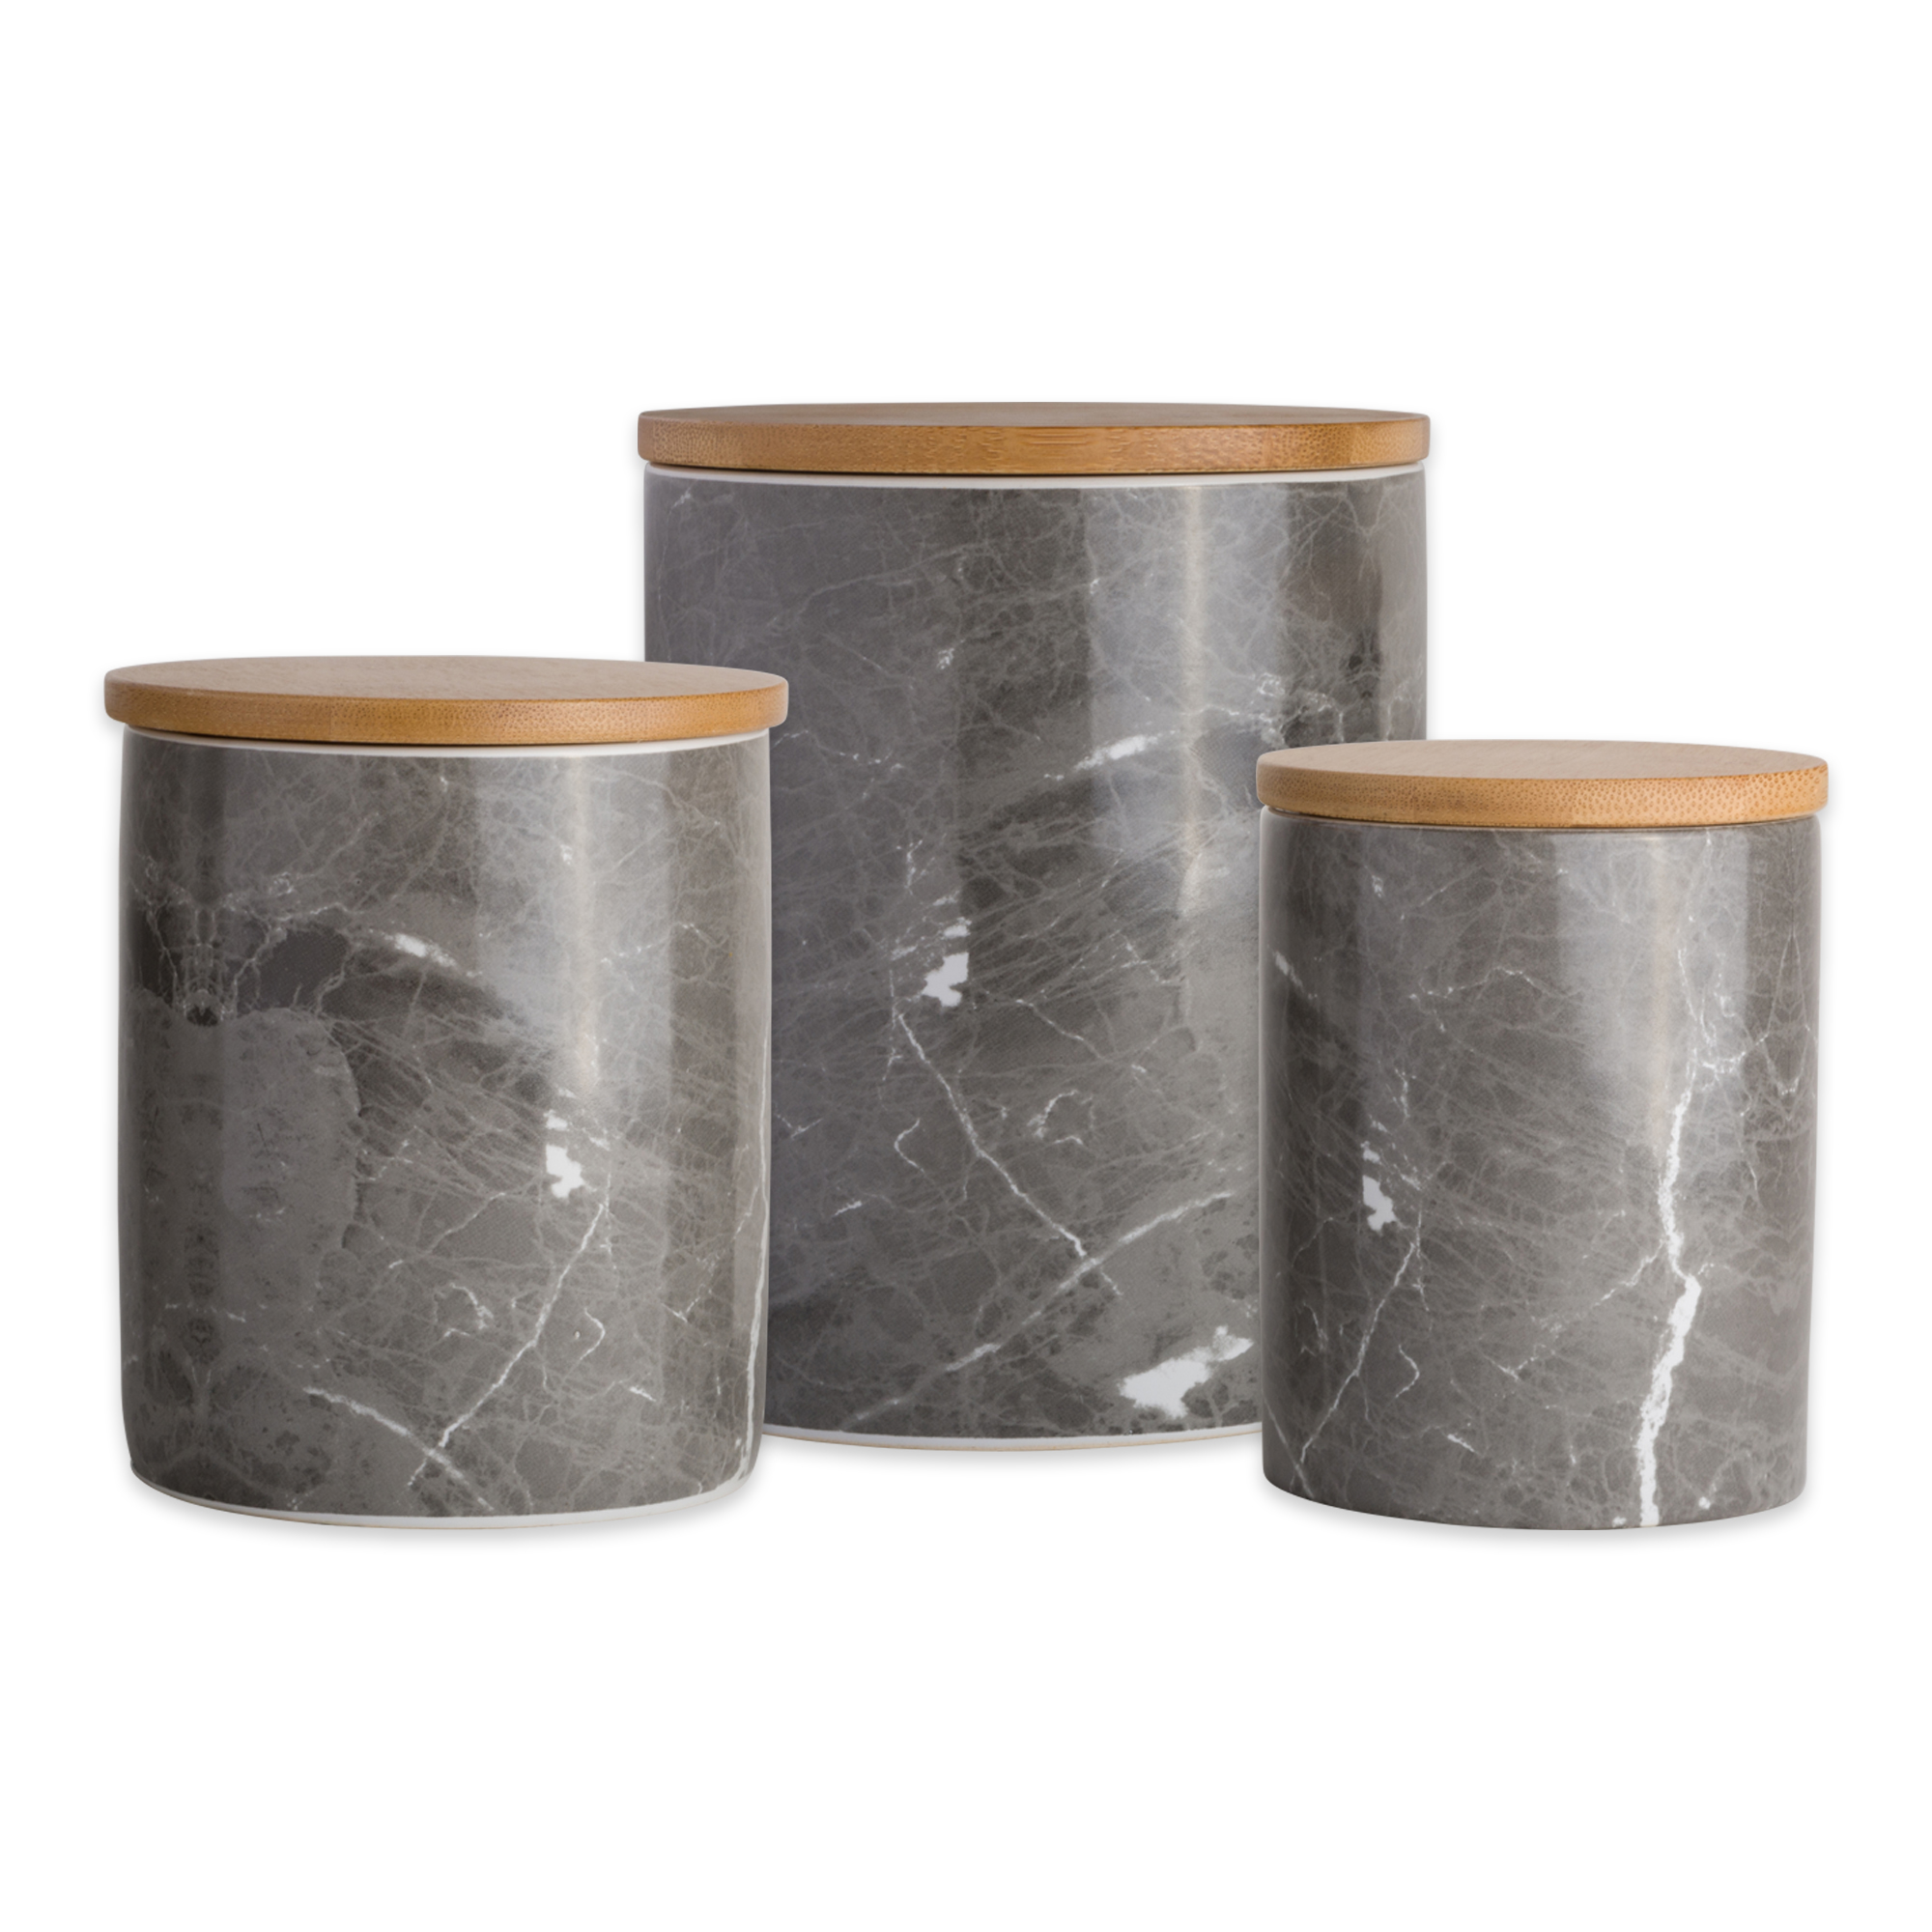 Black Marble Ceramic Canister (Set of 3) - image 1 of 3